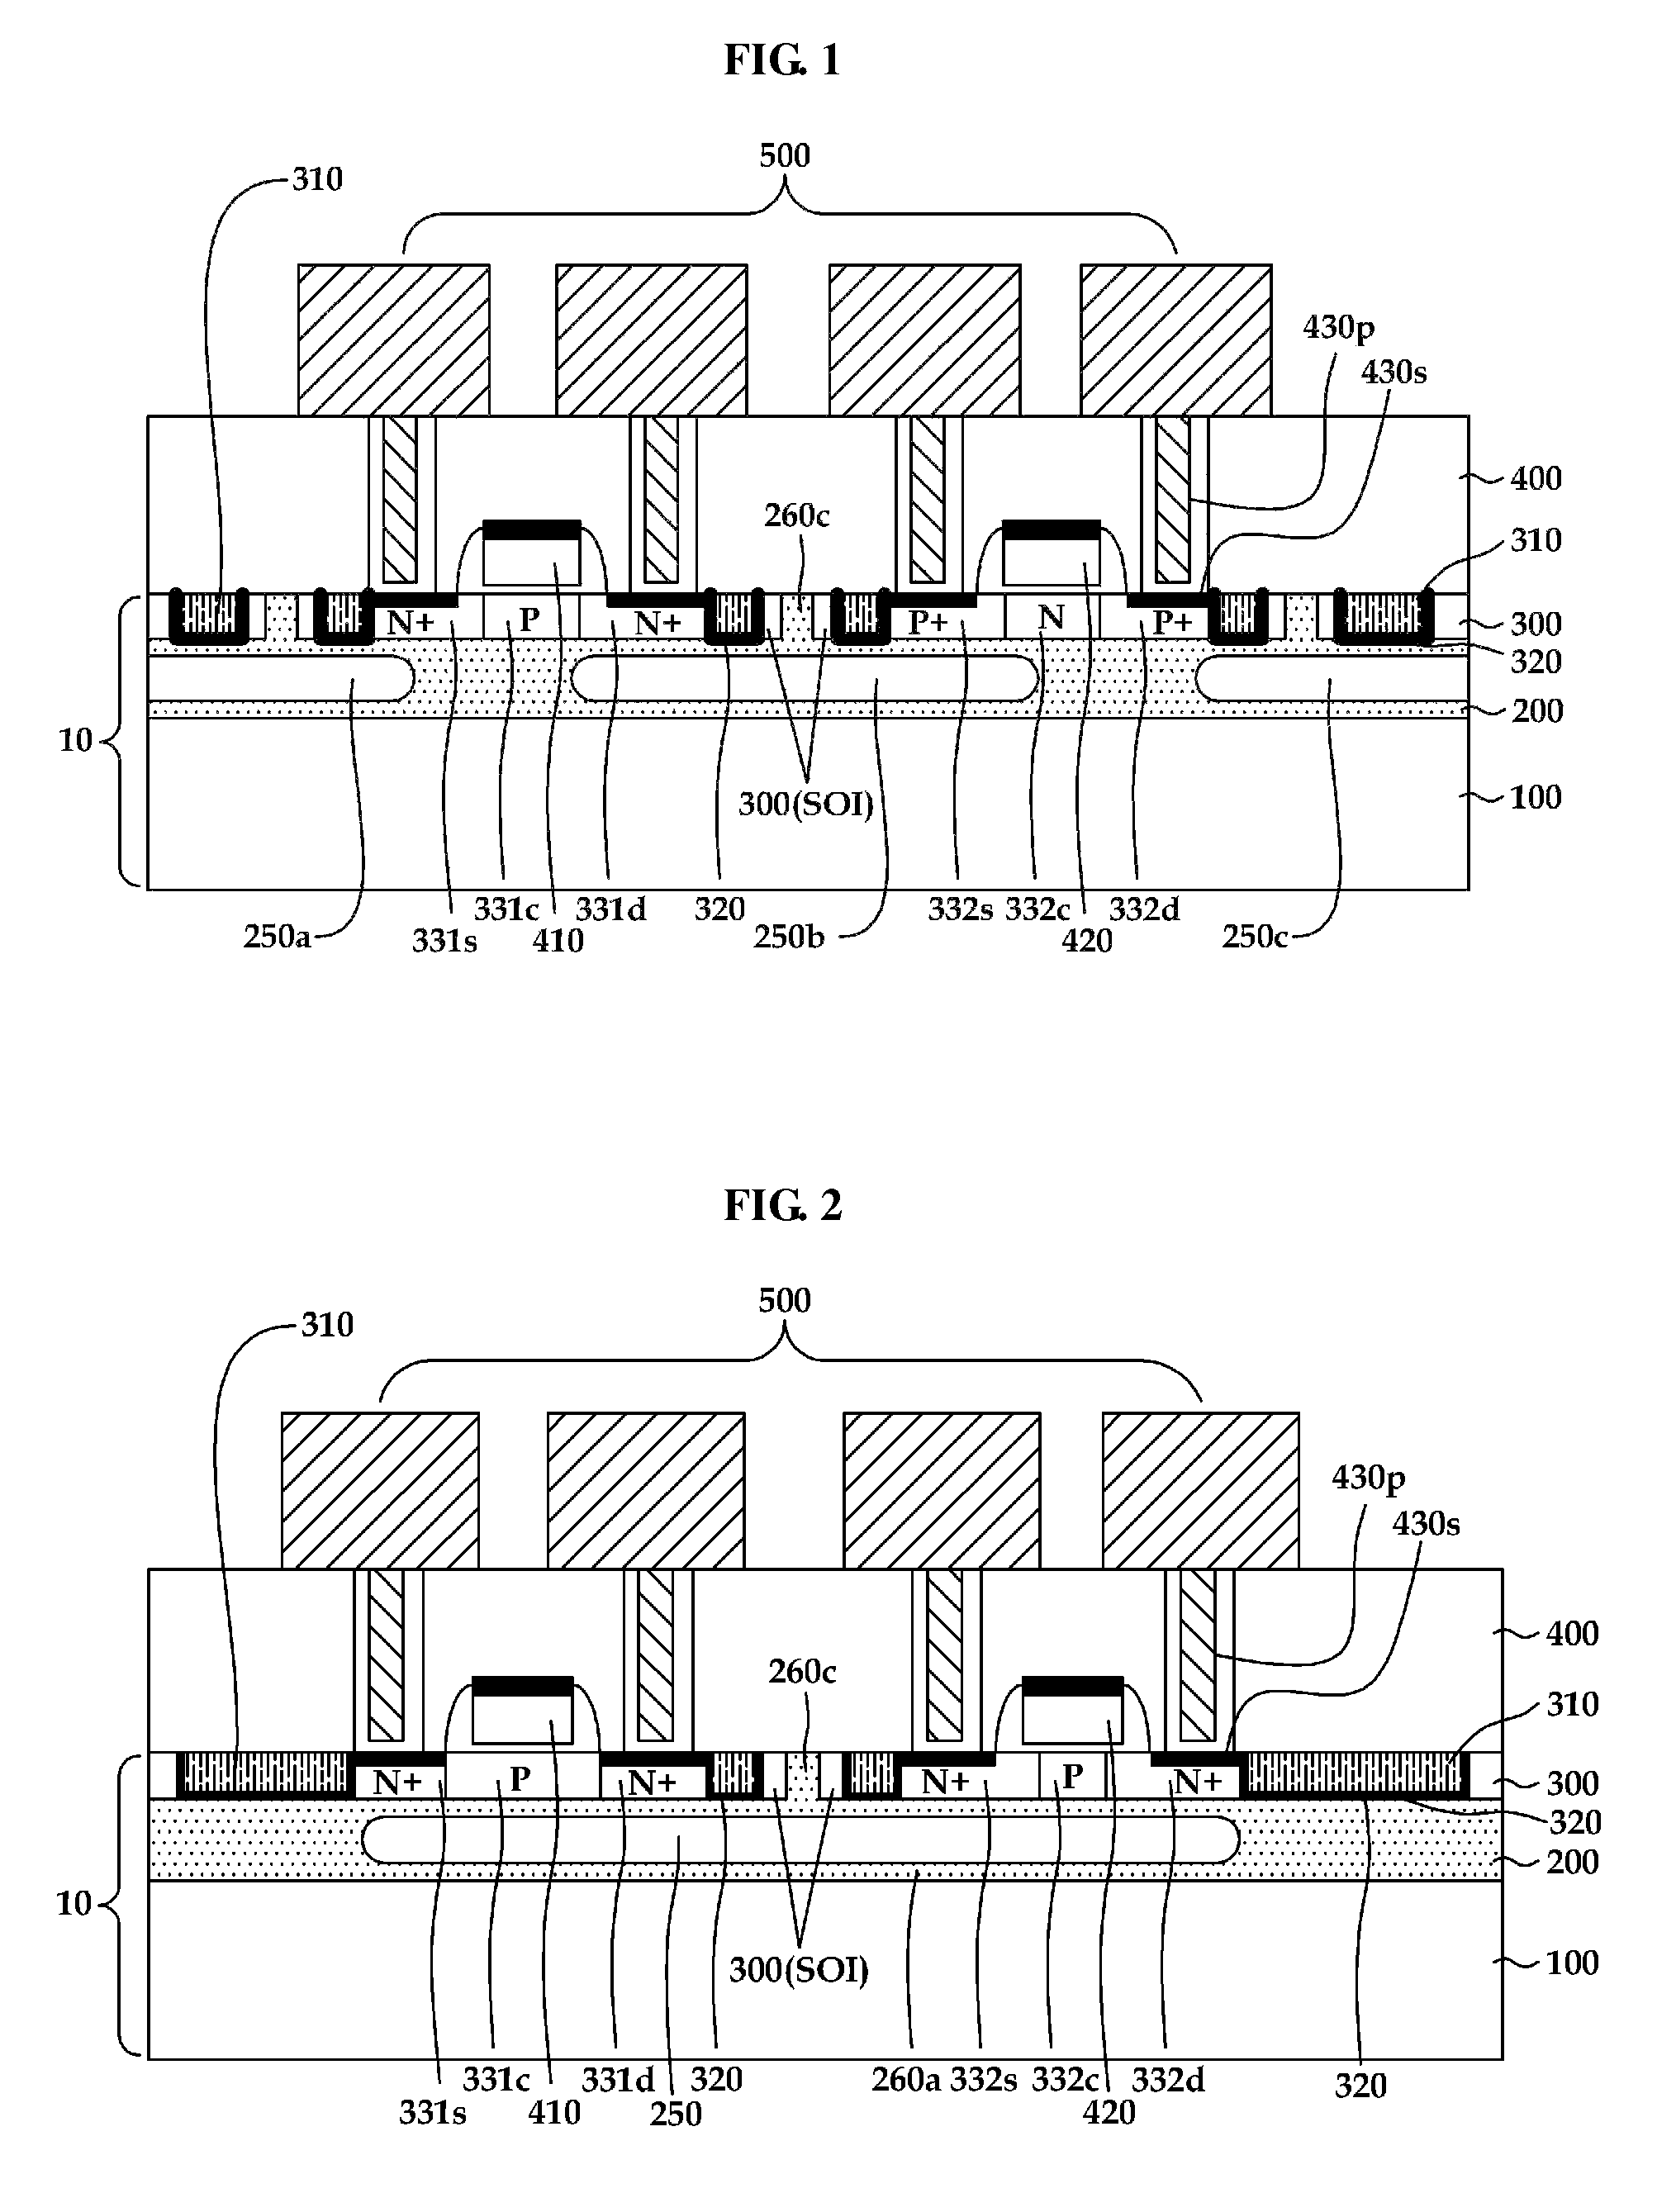 Semiconductor device with voids within silicon-on-insulator (SOI) structure and method of forming the semiconductor device